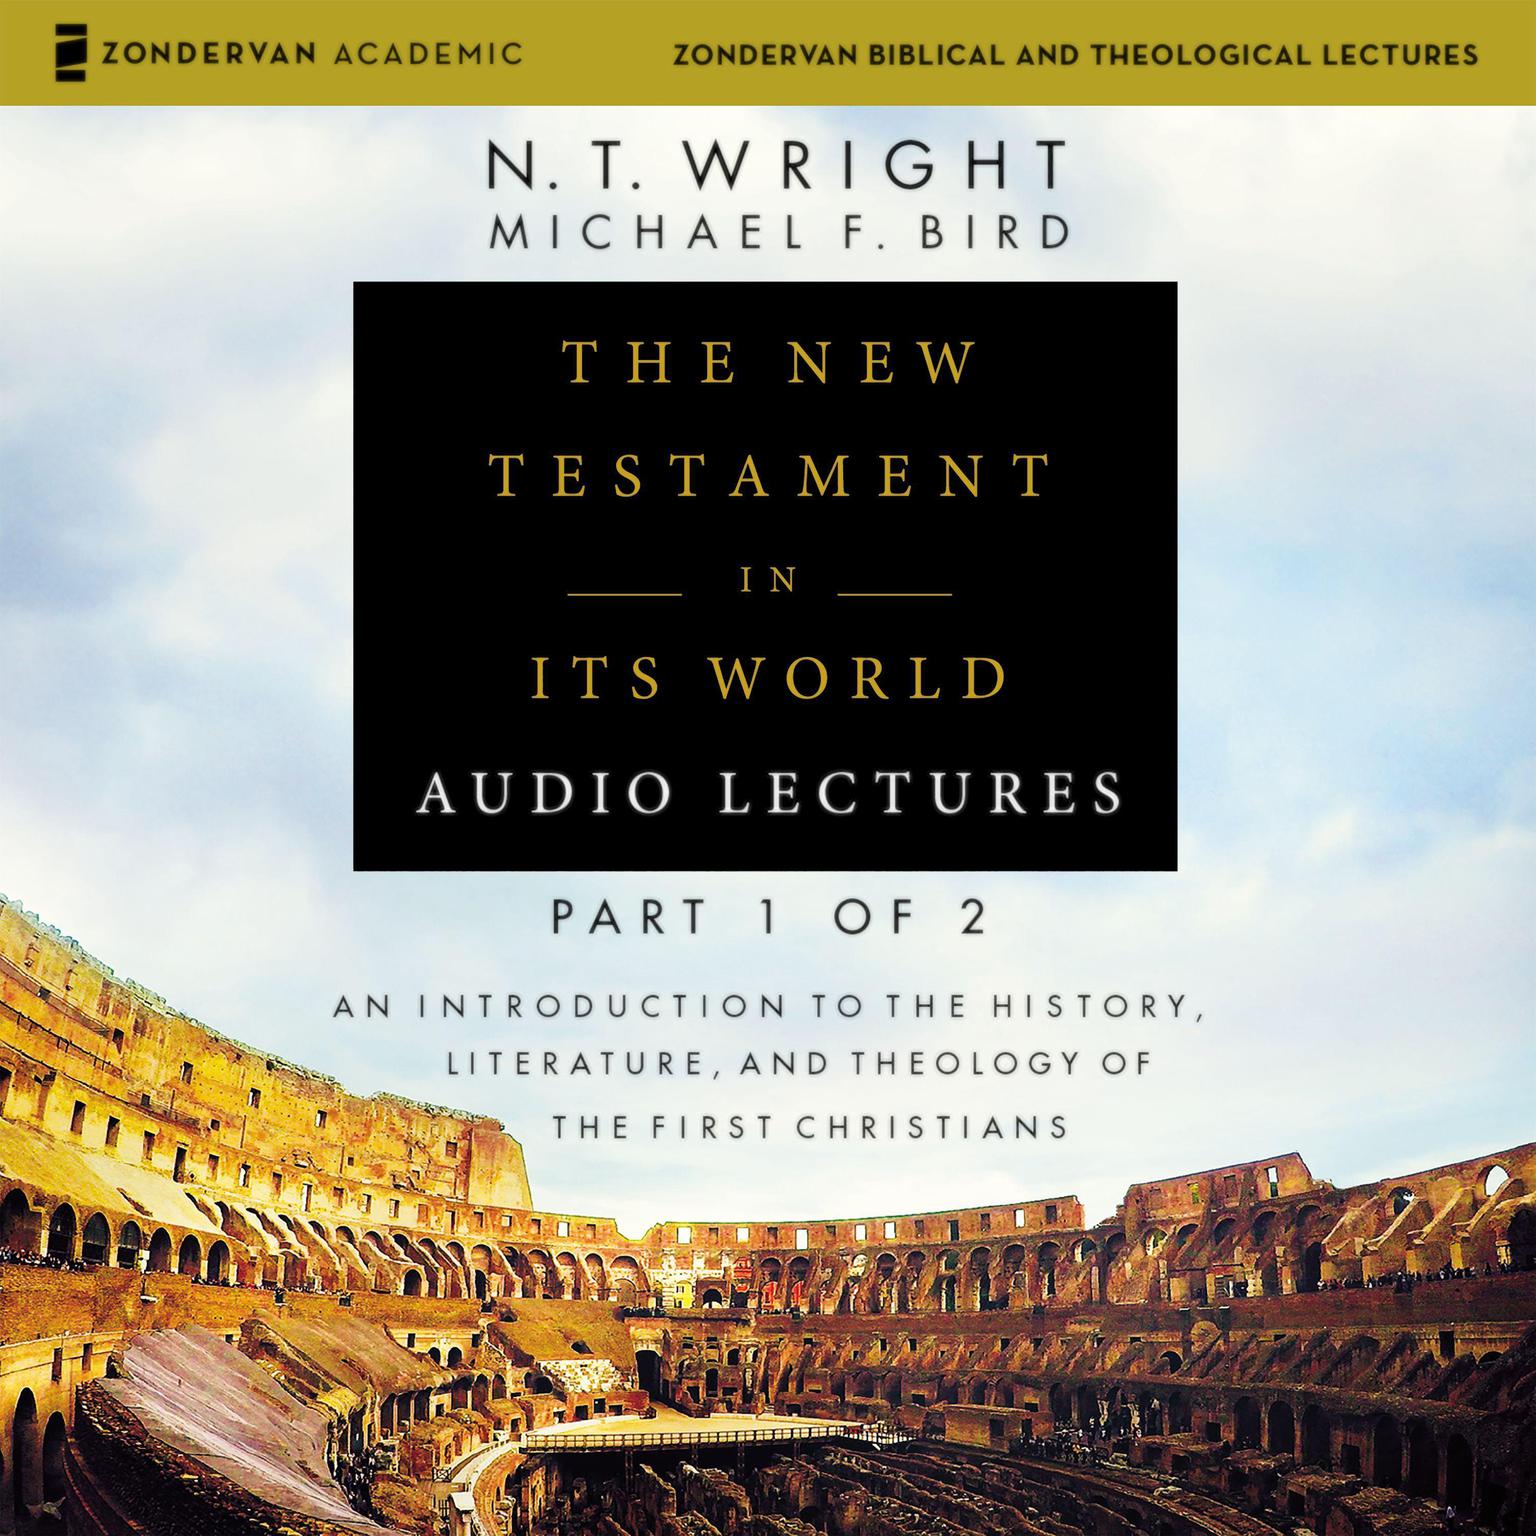 The New Testament in Its World: Audio Lectures, Part 1 of 2: An Introduction to the History, Literature, and Theology of the First Christians Audiobook, by N. T. Wright